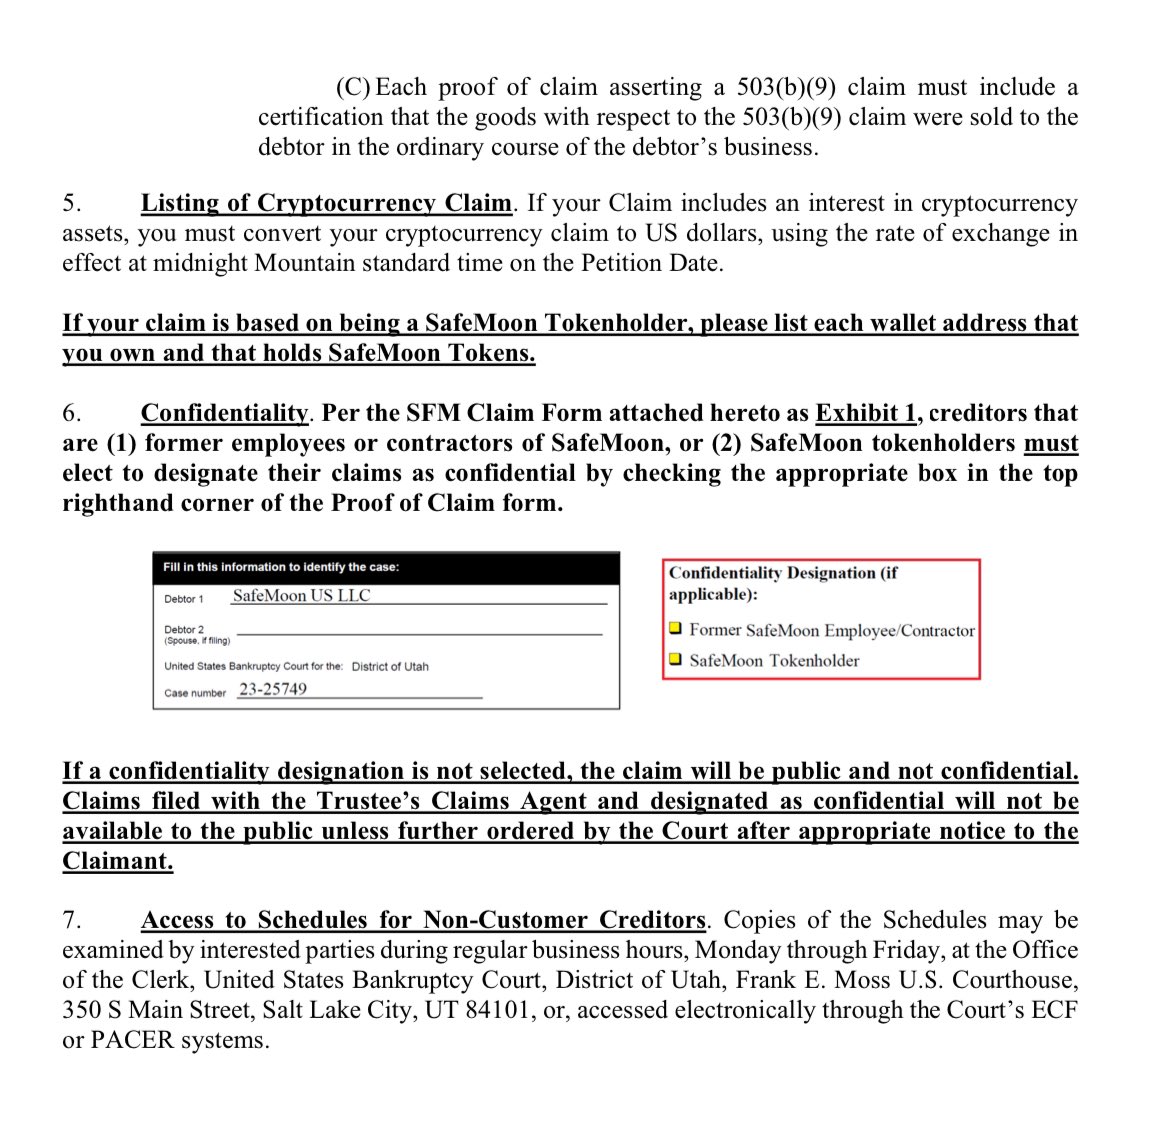 #Safemoon BK Update April 17th 2024

Deadlines for filing proofs of claims - “Bar Date & Government Bar Date”

Motion is granted. July 22nd 2024 is established as the deadline for filing of Proofs of Claims against debtor - for both. 

Bar date notice/link should be provided to…